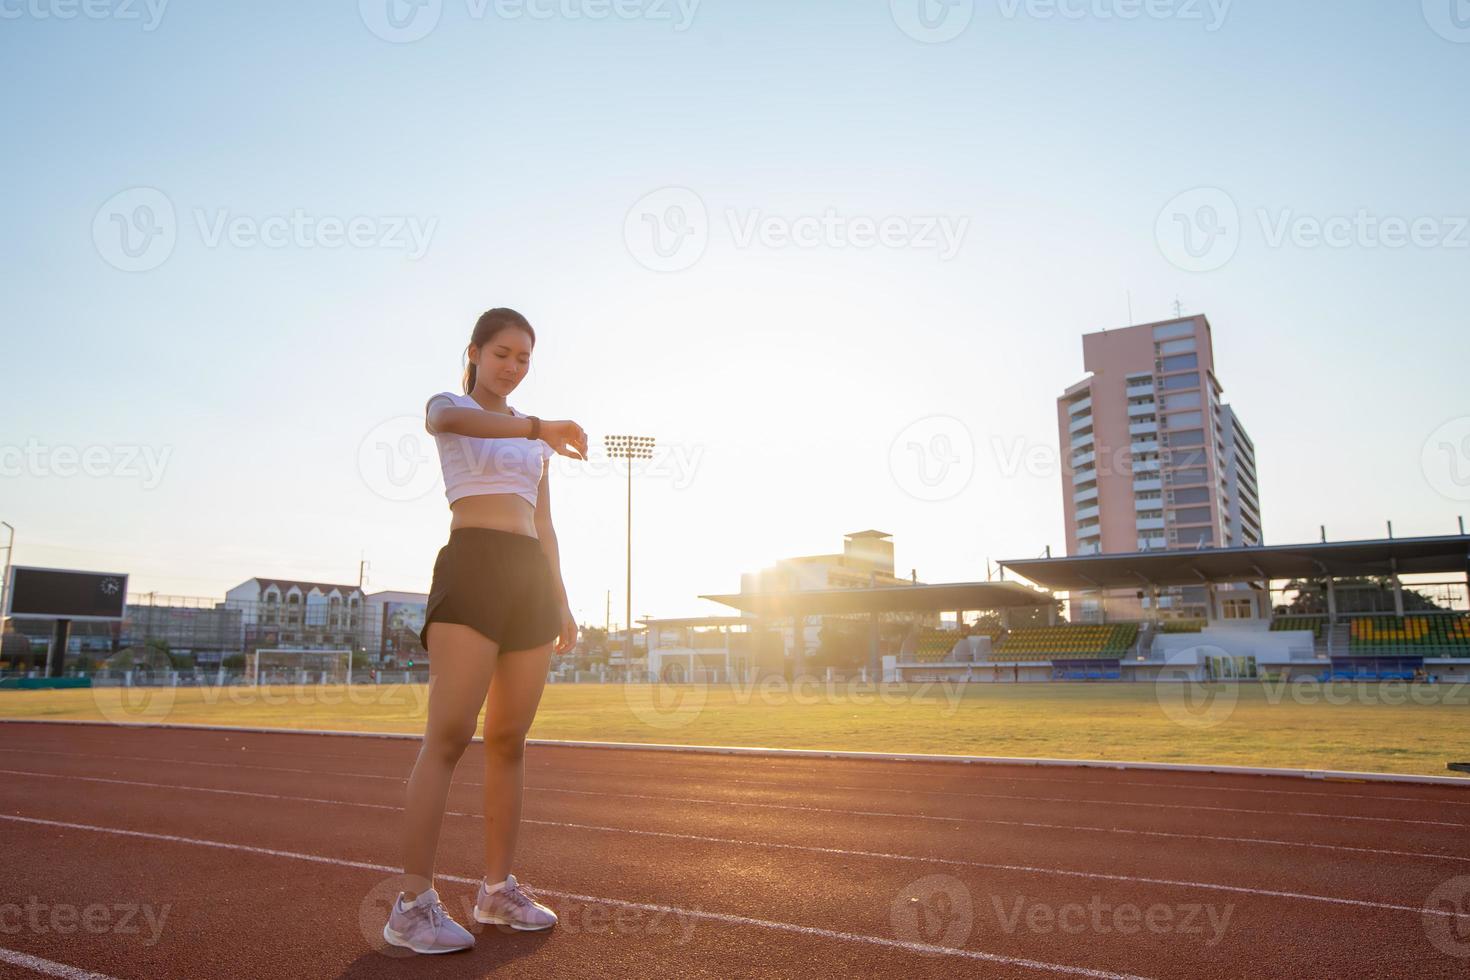 Asian women is watching the sport watch or smart watch for jogging on stadium track -healthy lifestyle and sport concepts photo